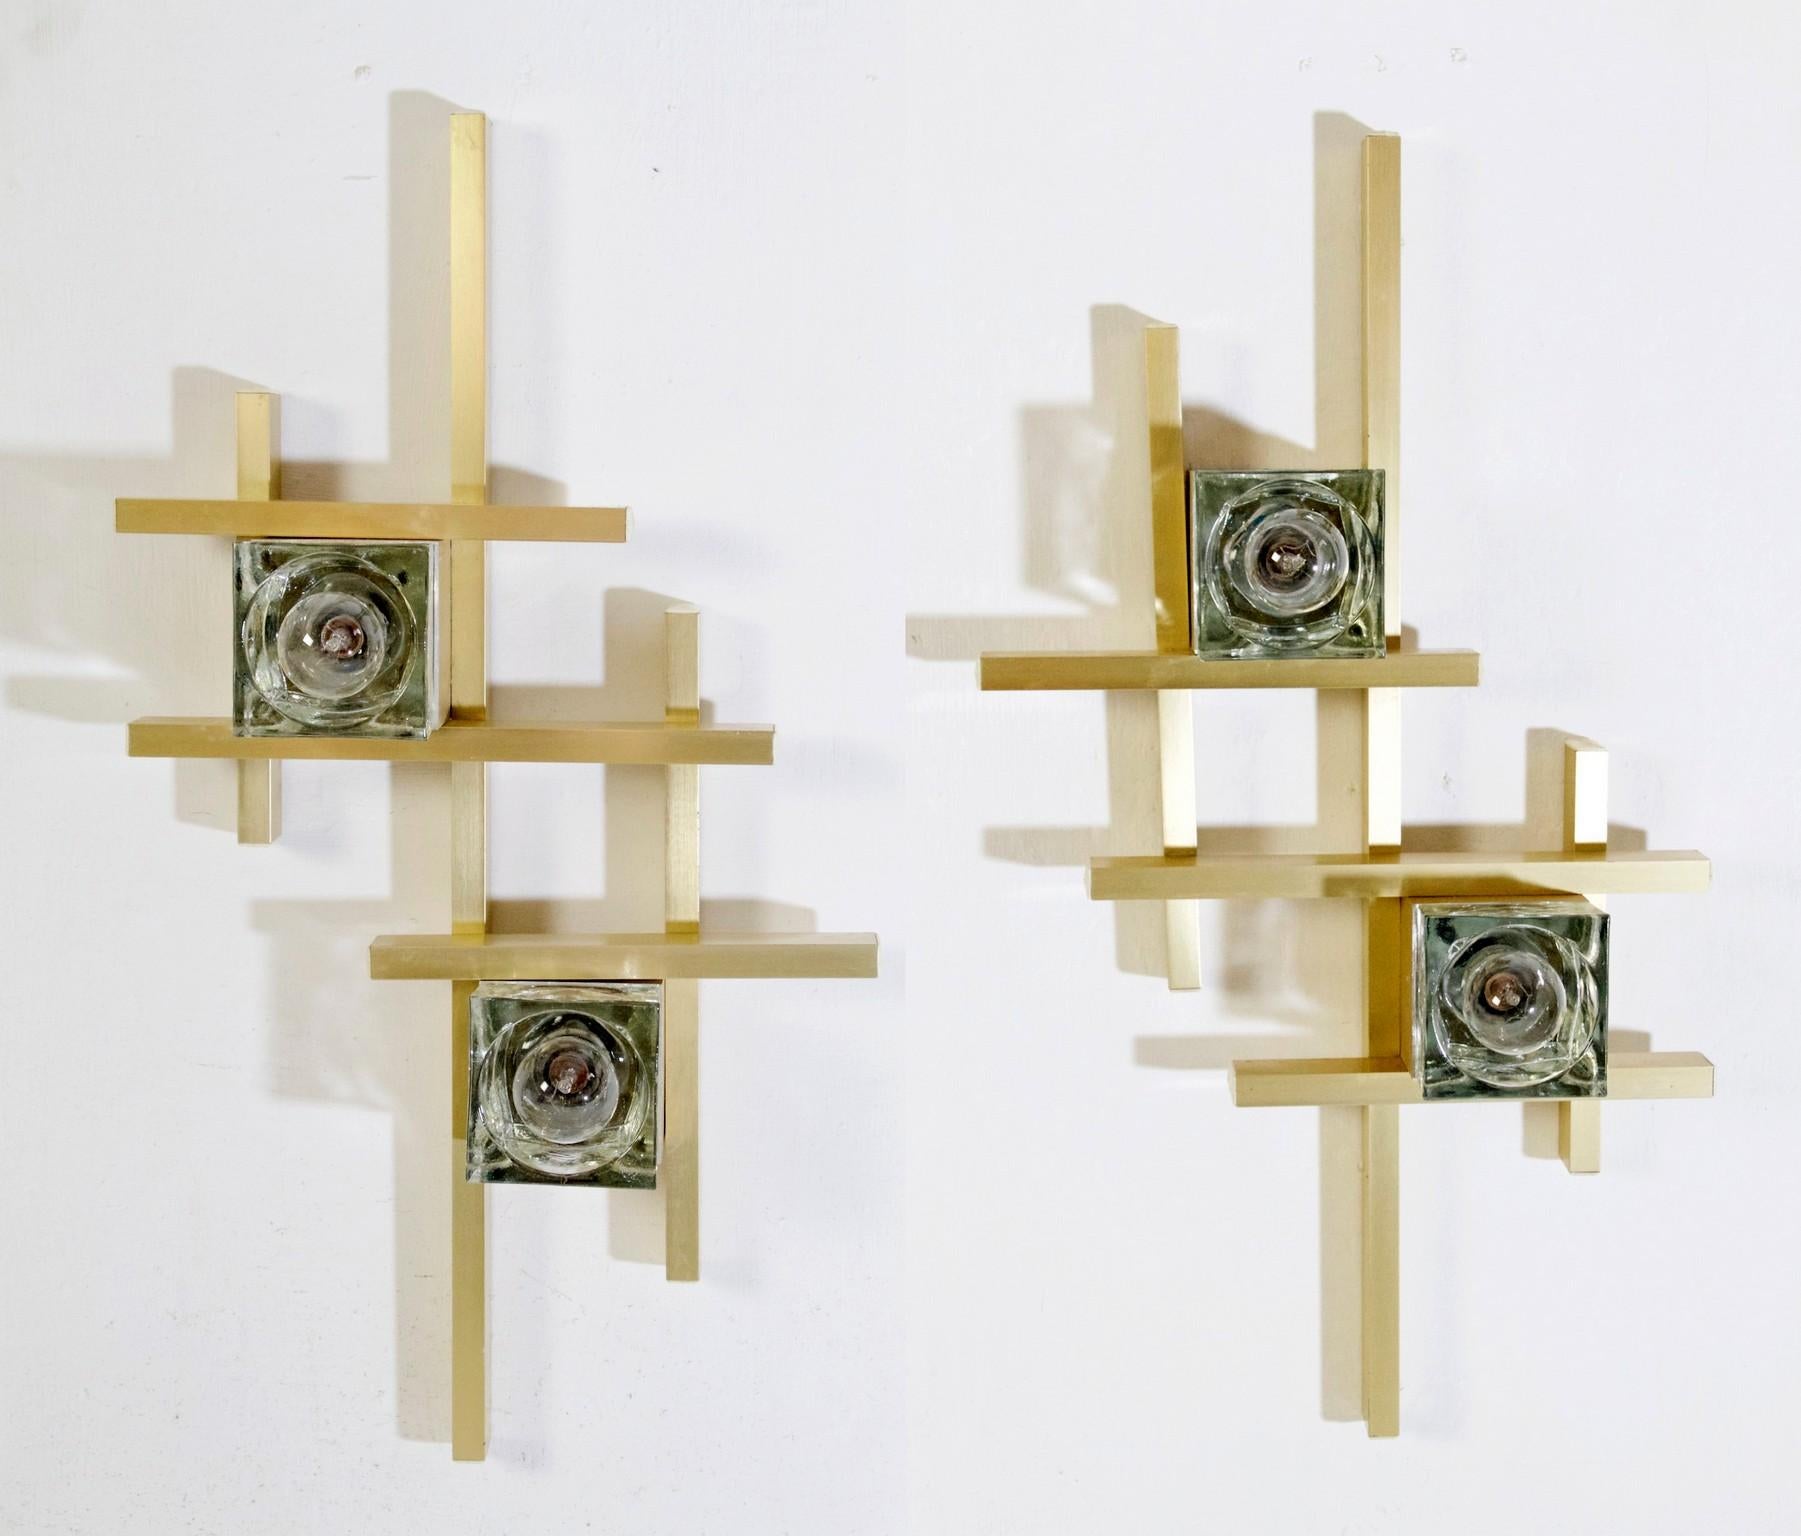 A pair of wall sconces from the Cubic series by Gaetano Sciolari in gold colored metal with two lightbulbs each set in a square of Murano glass.